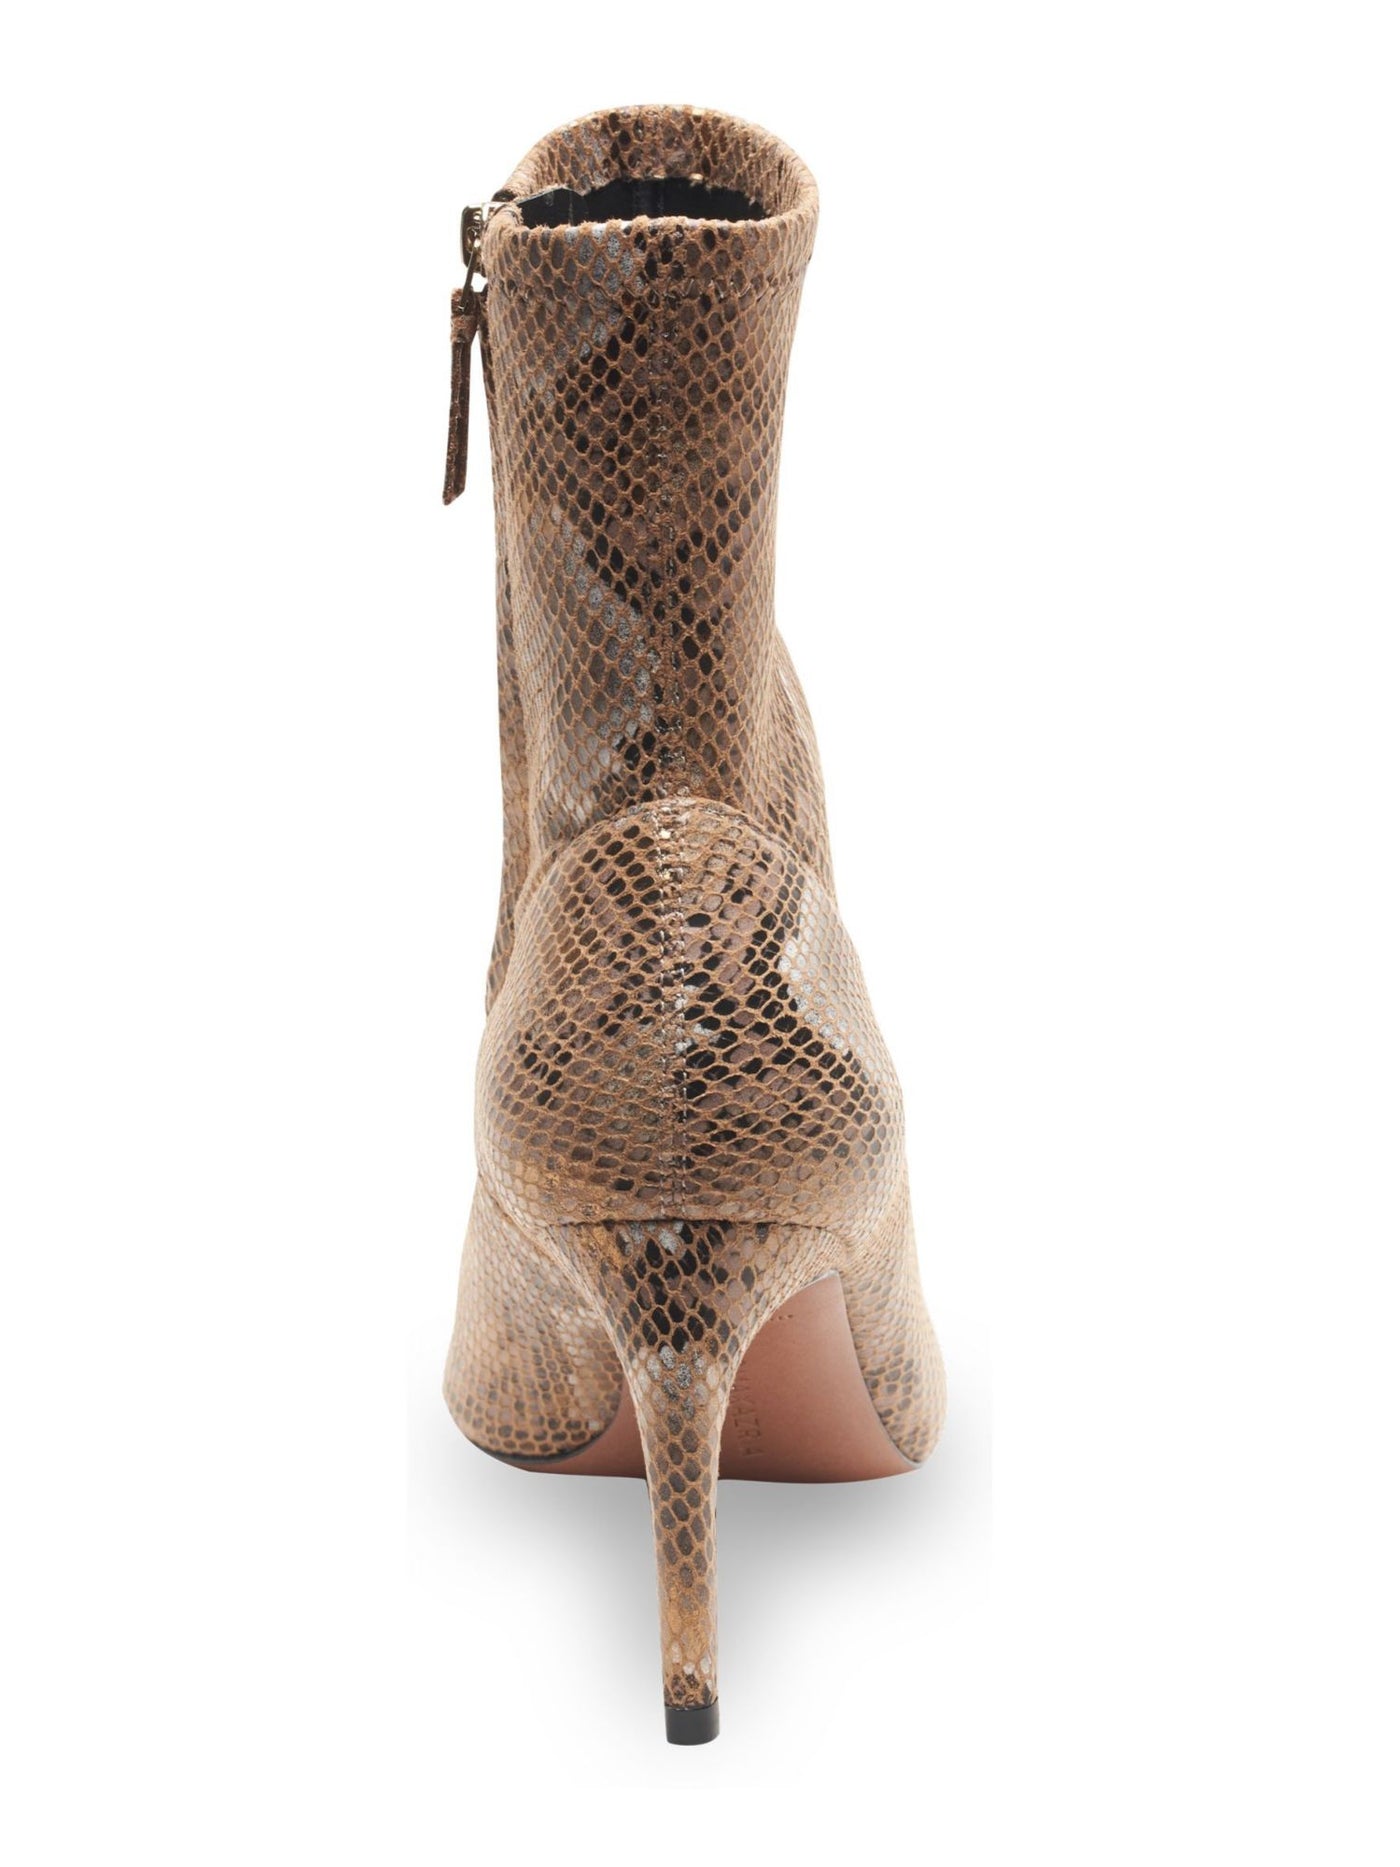 BCBG MAXAZRIA Womens Beige Snake Print Cushioned Bowie Pointed Toe Stiletto Zip-Up Booties 9